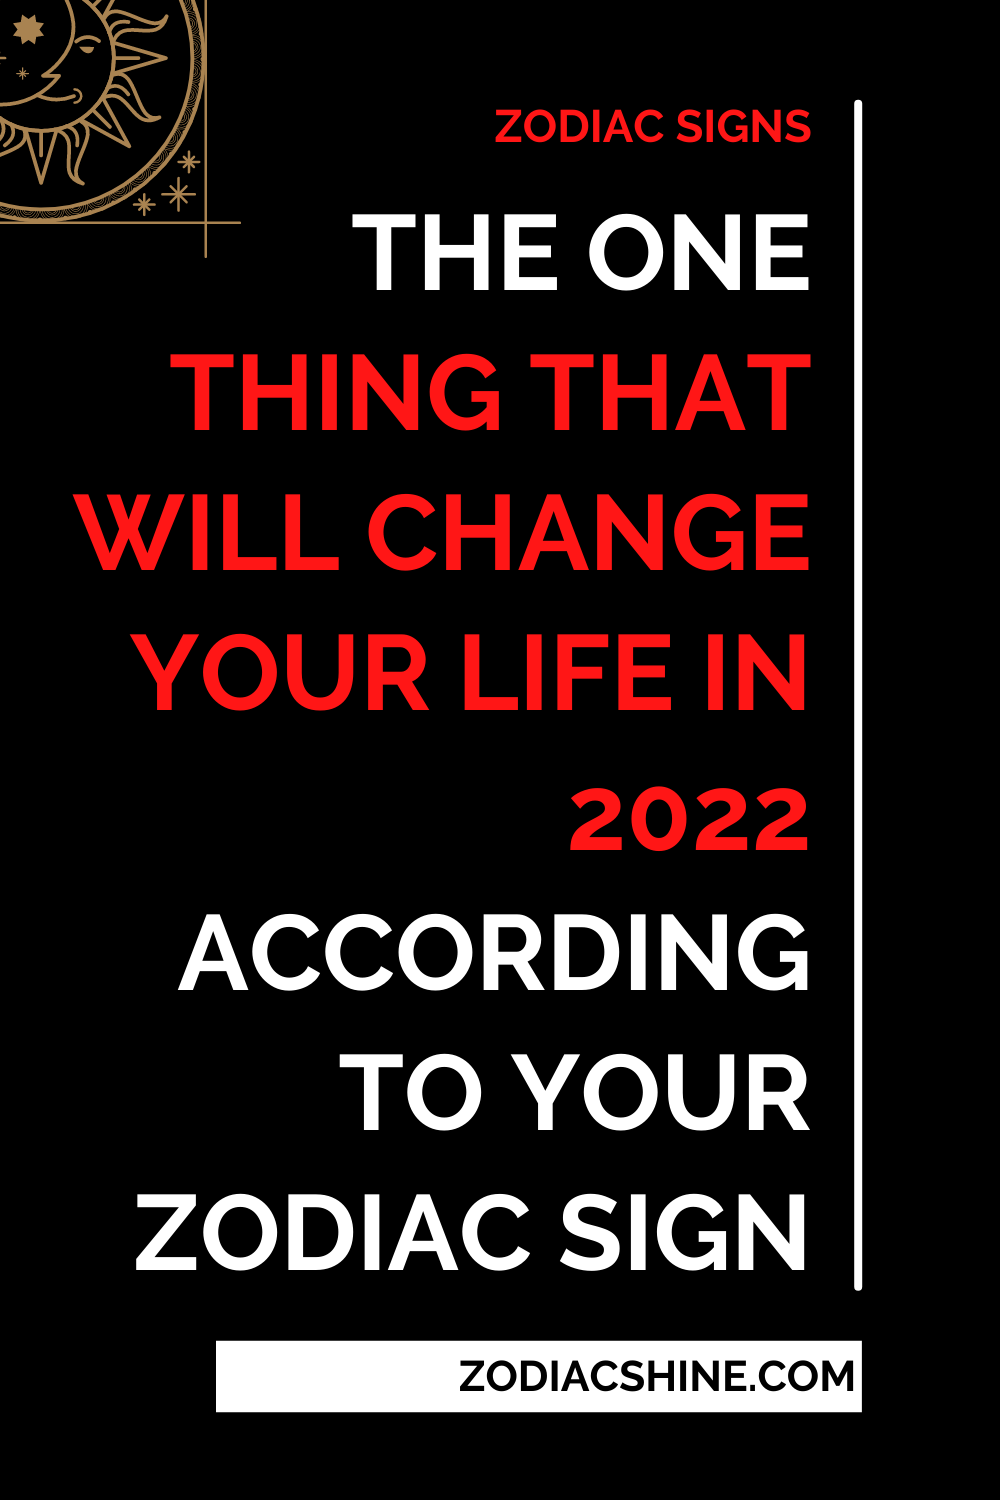 The One Thing That Will Change Your Life In 2022 According To Your Zodiac Sign